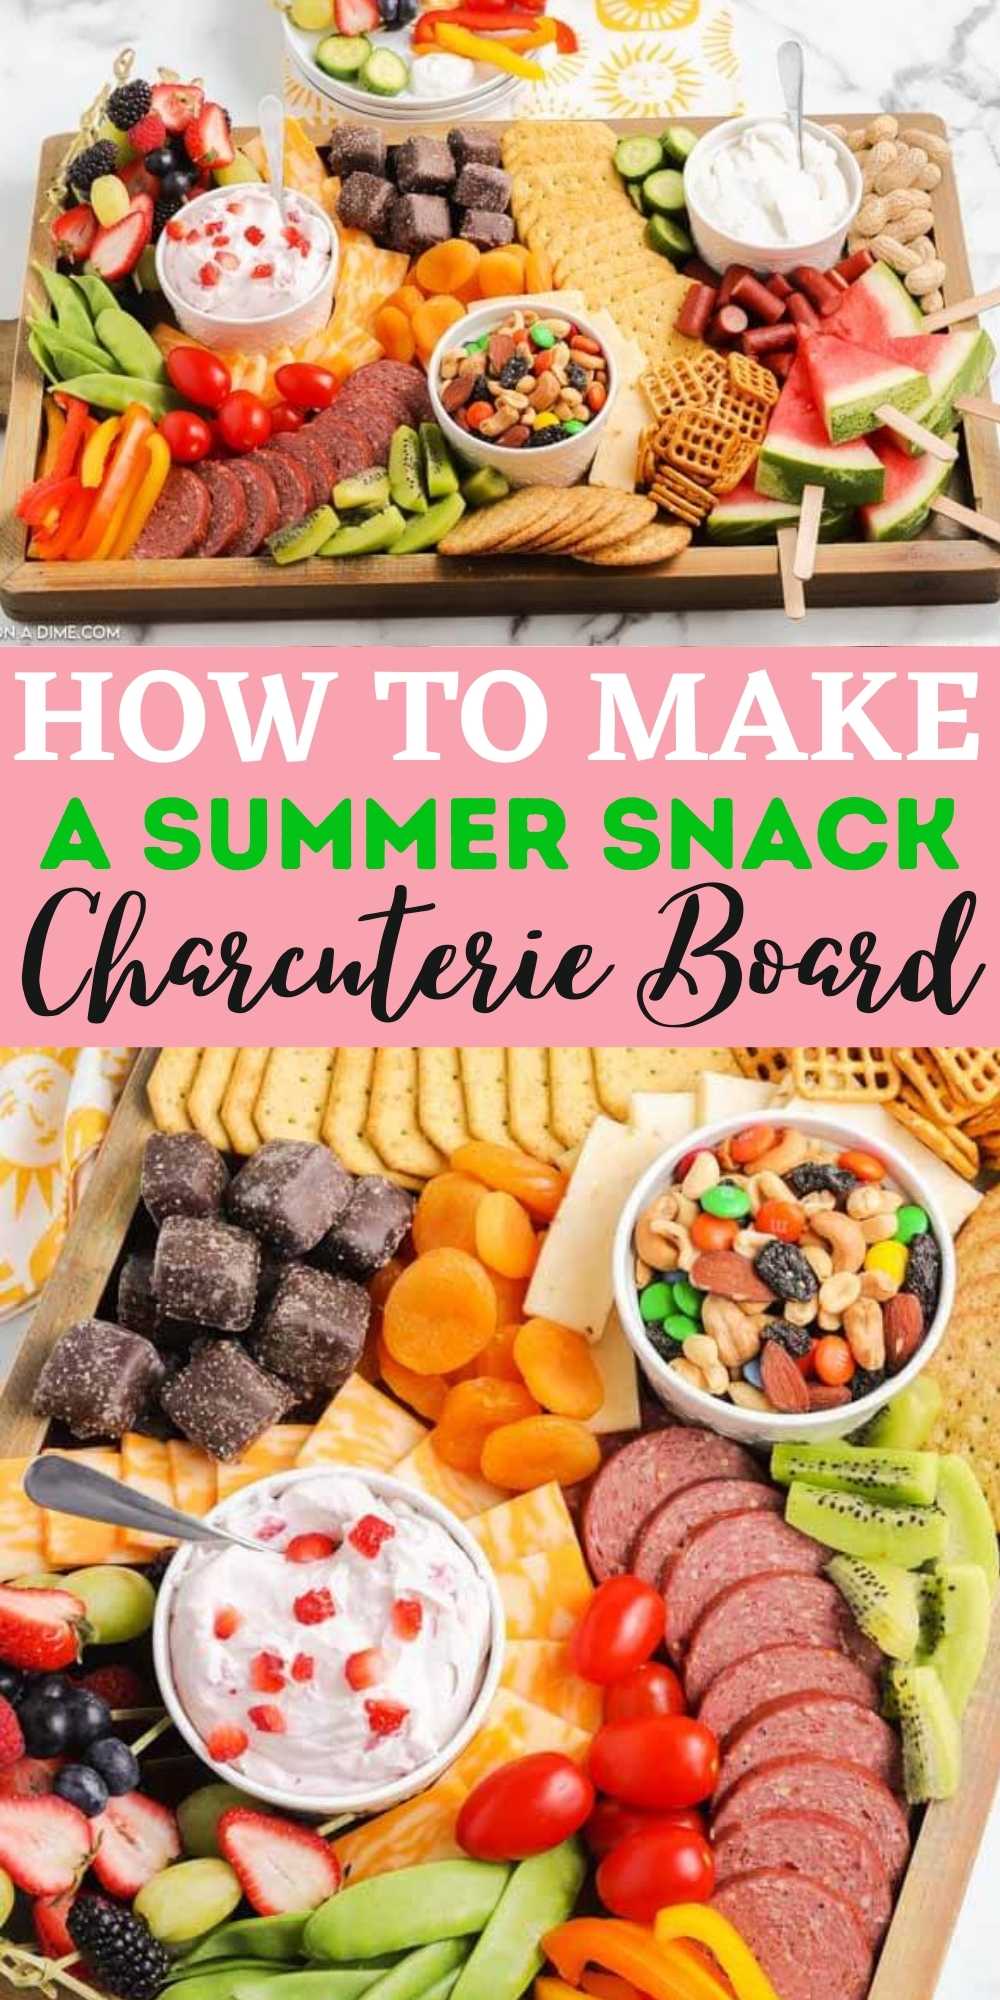 How to build a beautiful summer snack charcuterie board. These step-by-step instructions will show you exactly how to put your charcuterie board together to create a fun snack board for parties or for your family. You are going to love this summer charcuterie board ideas that are simple to make too! #cheeseboard #charcuterie #charcuterieboard #summersnacks 
